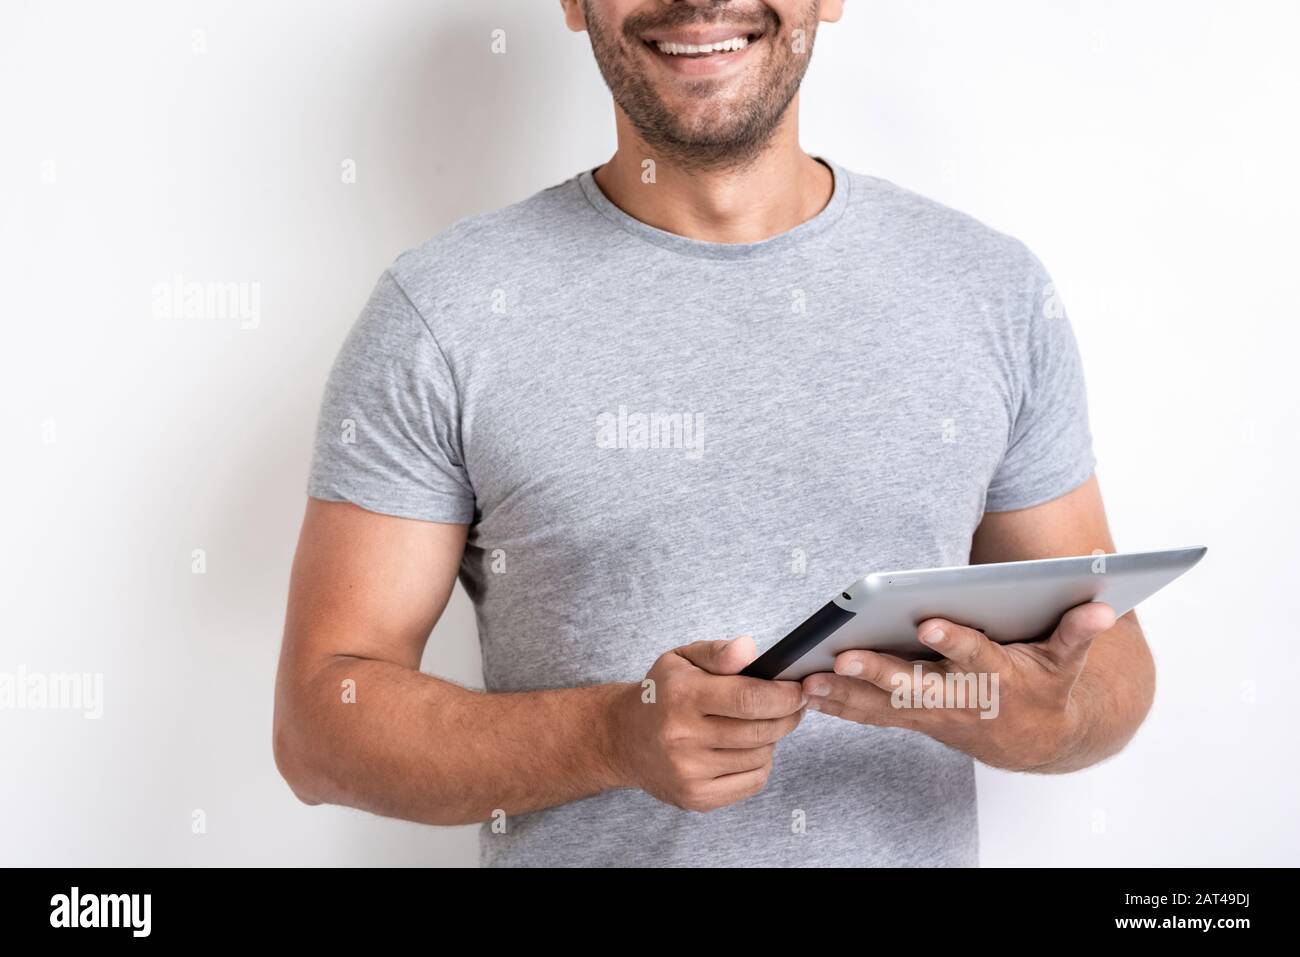 Smiling man holding ipad in his hands. - Cropping image Stock Photo